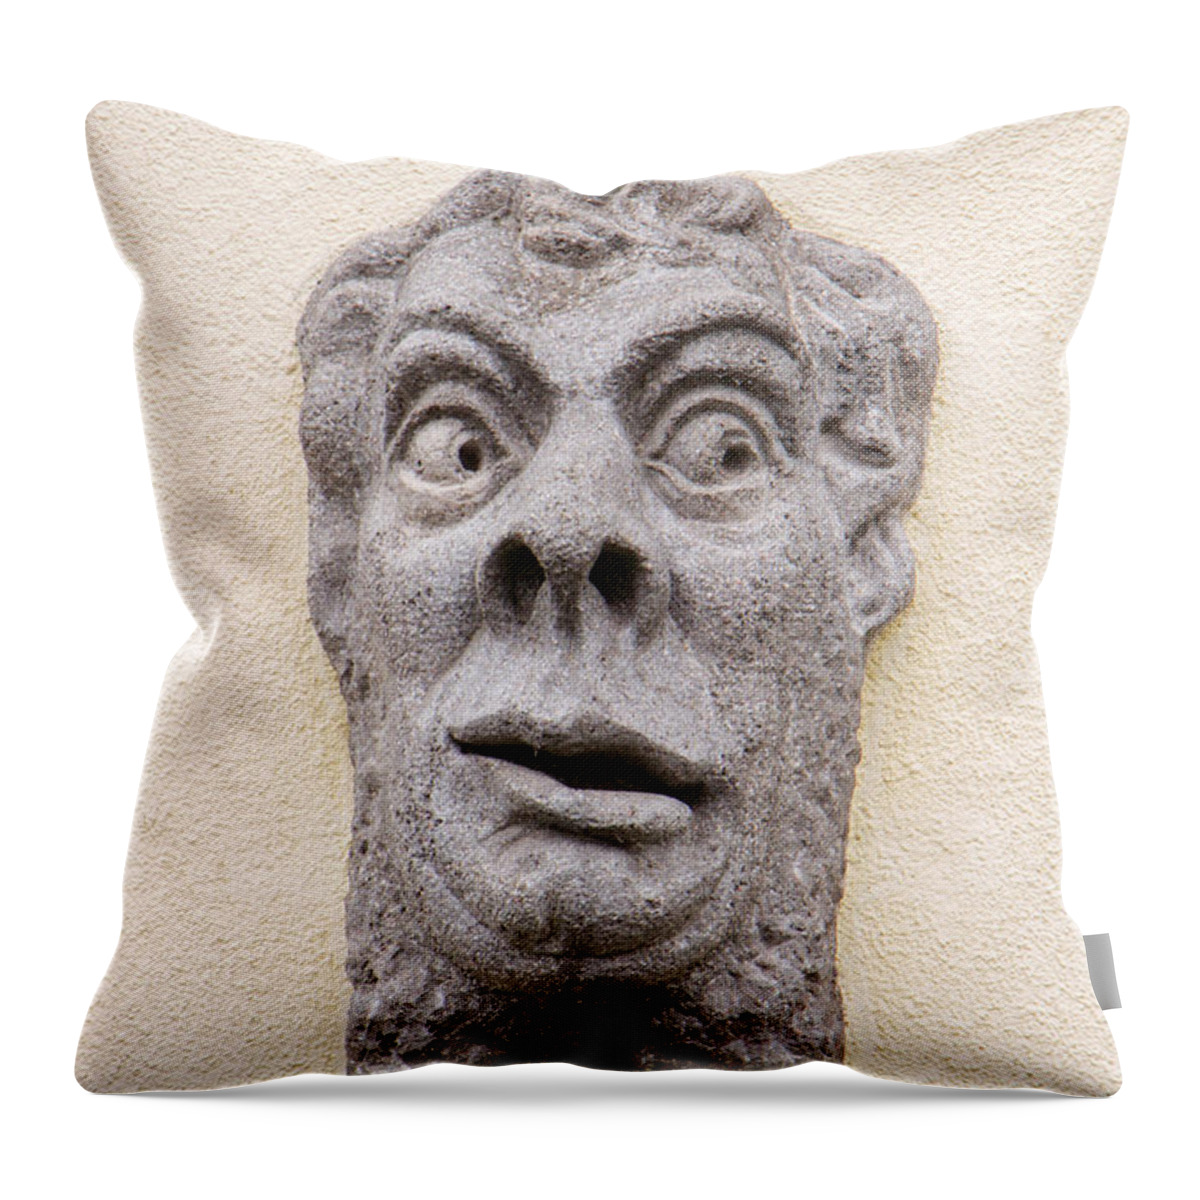 Funny Face - Stone Sculpture Throw Pillow by David Anderson - Pixels